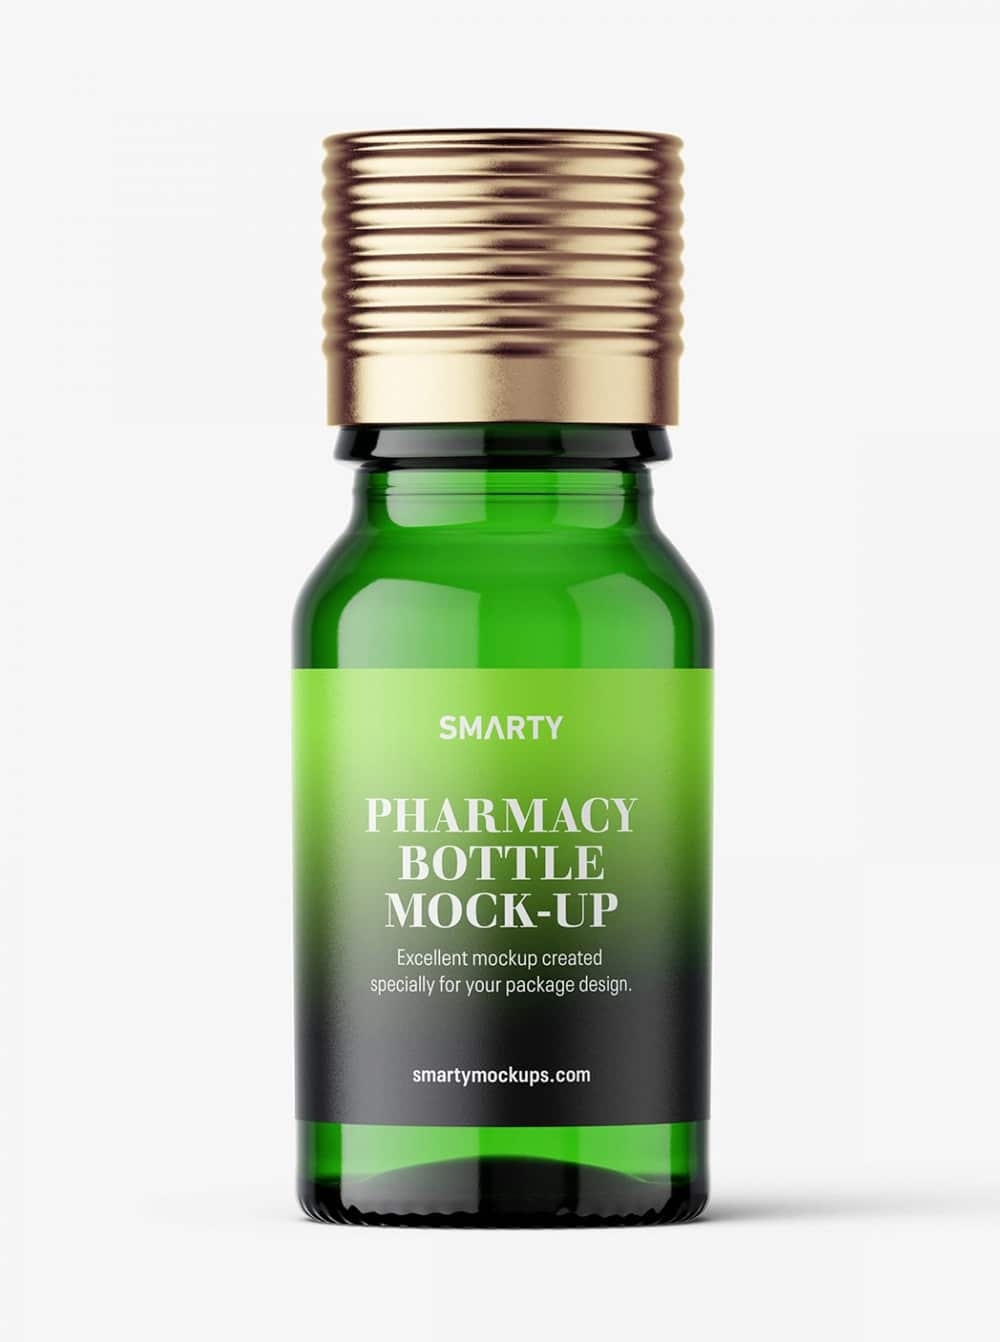 Green Pharmaceutical Bottle With Silver Cap